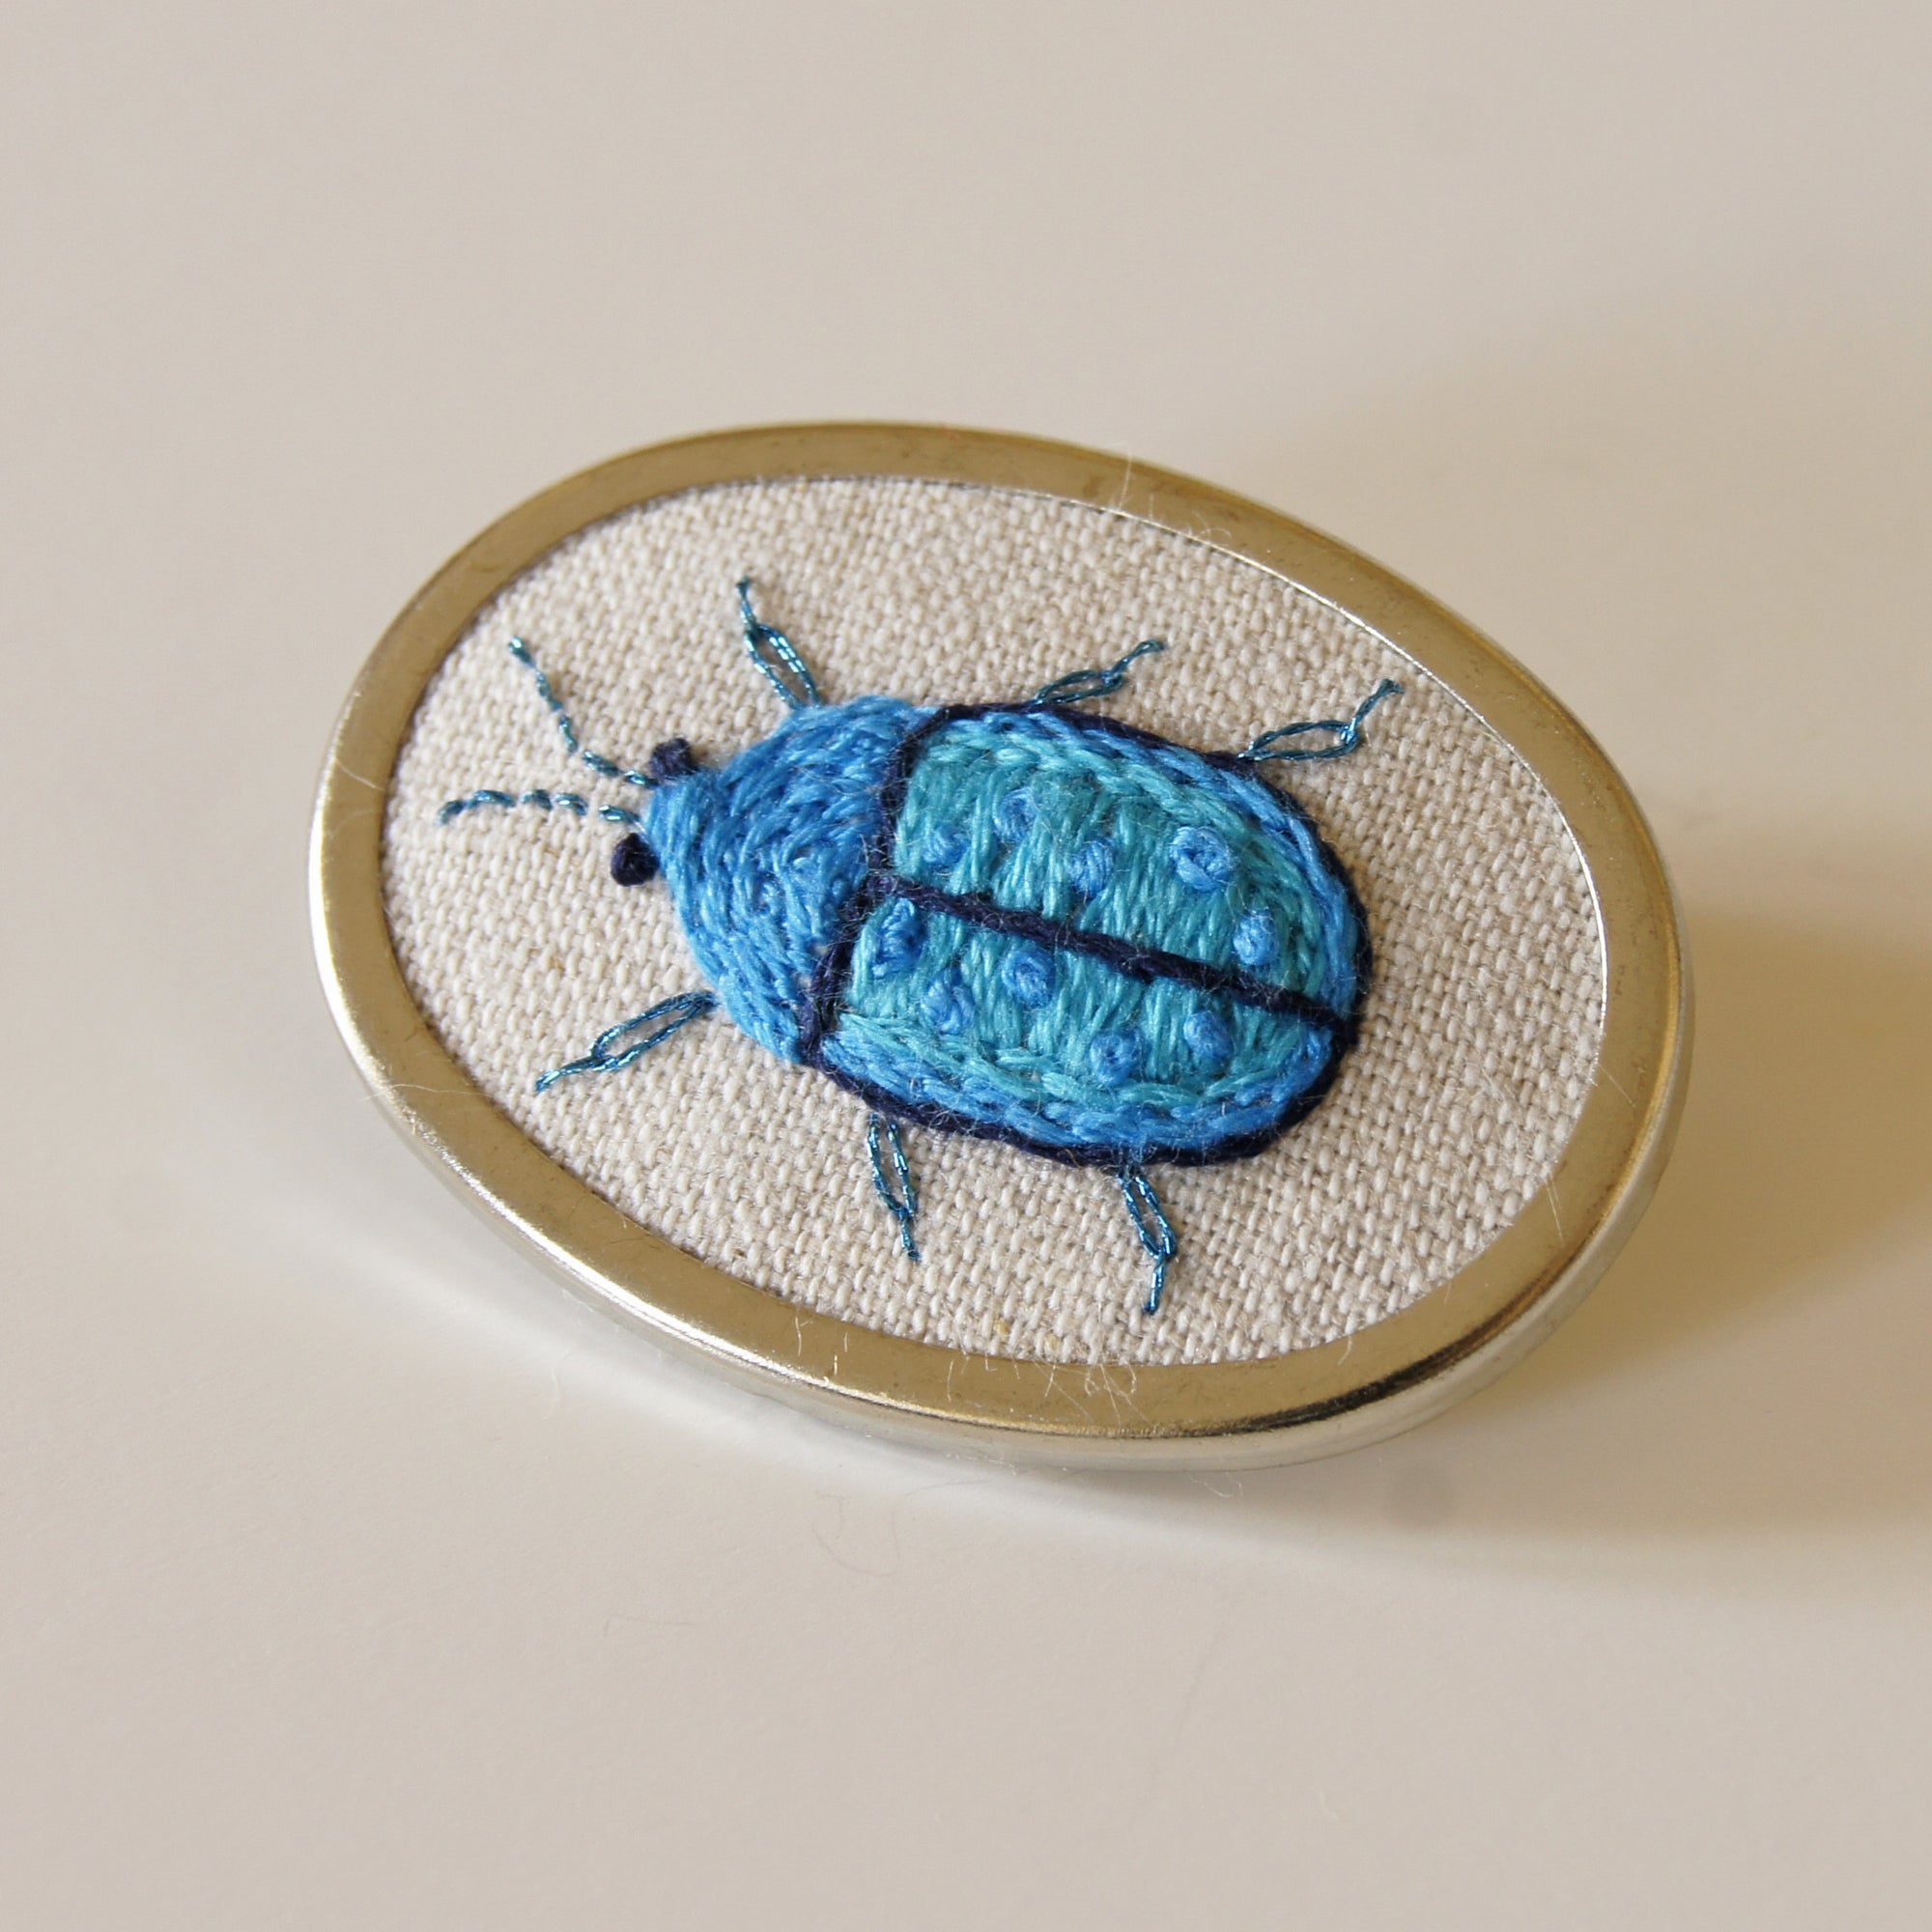 Tortoise Beetle brooch hand embroidered entomology jewelry